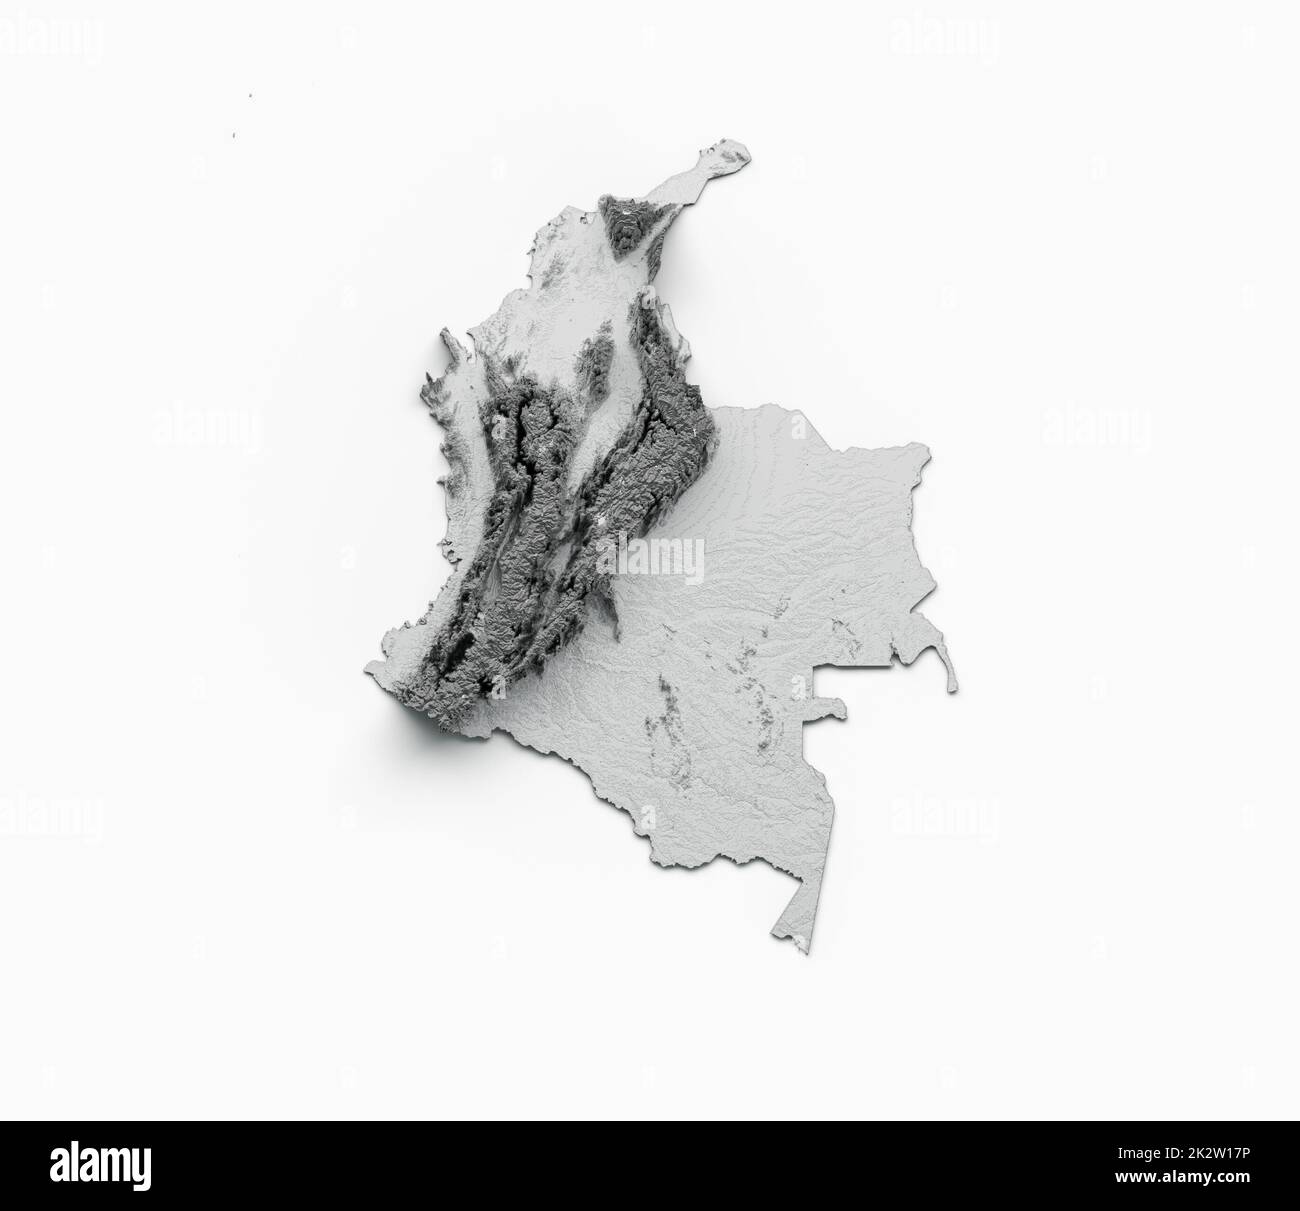 A 3D grayscale rendering of the Colombia-shaped topography map isolated on a white background Stock Photo